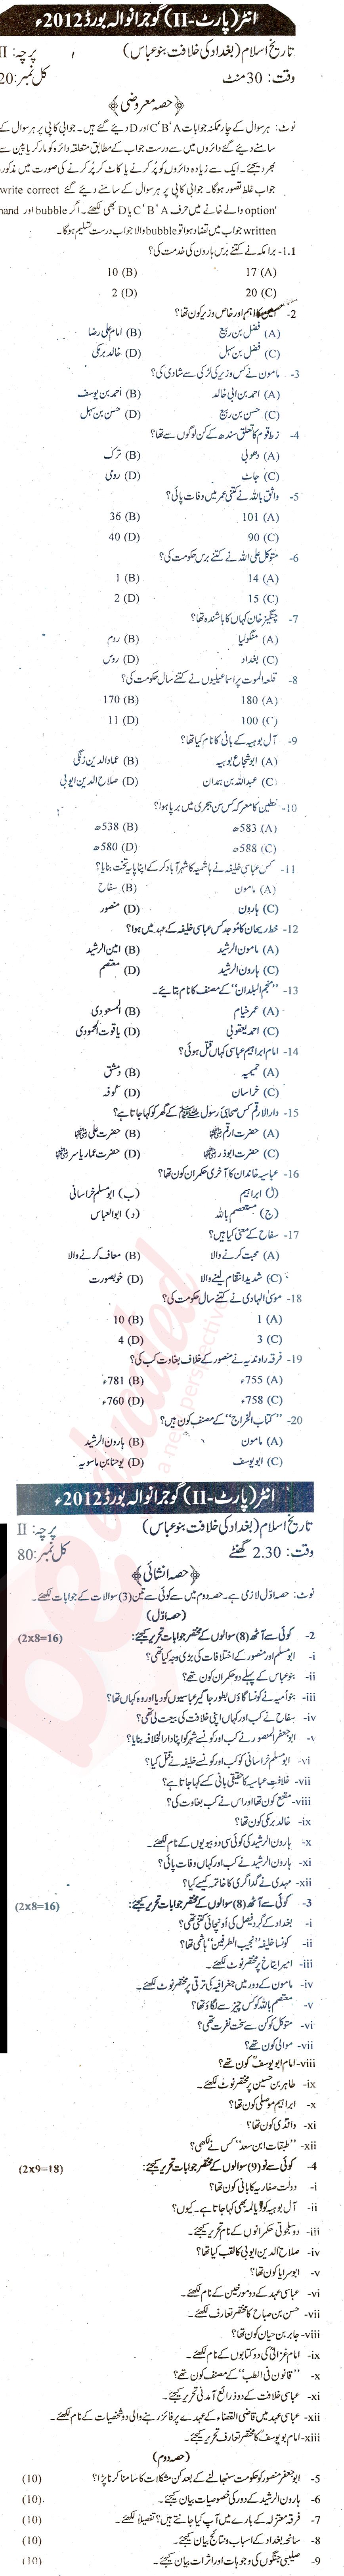 Islamic History FA Part 2 Past Paper Group 1 BISE Gujranwala 2012